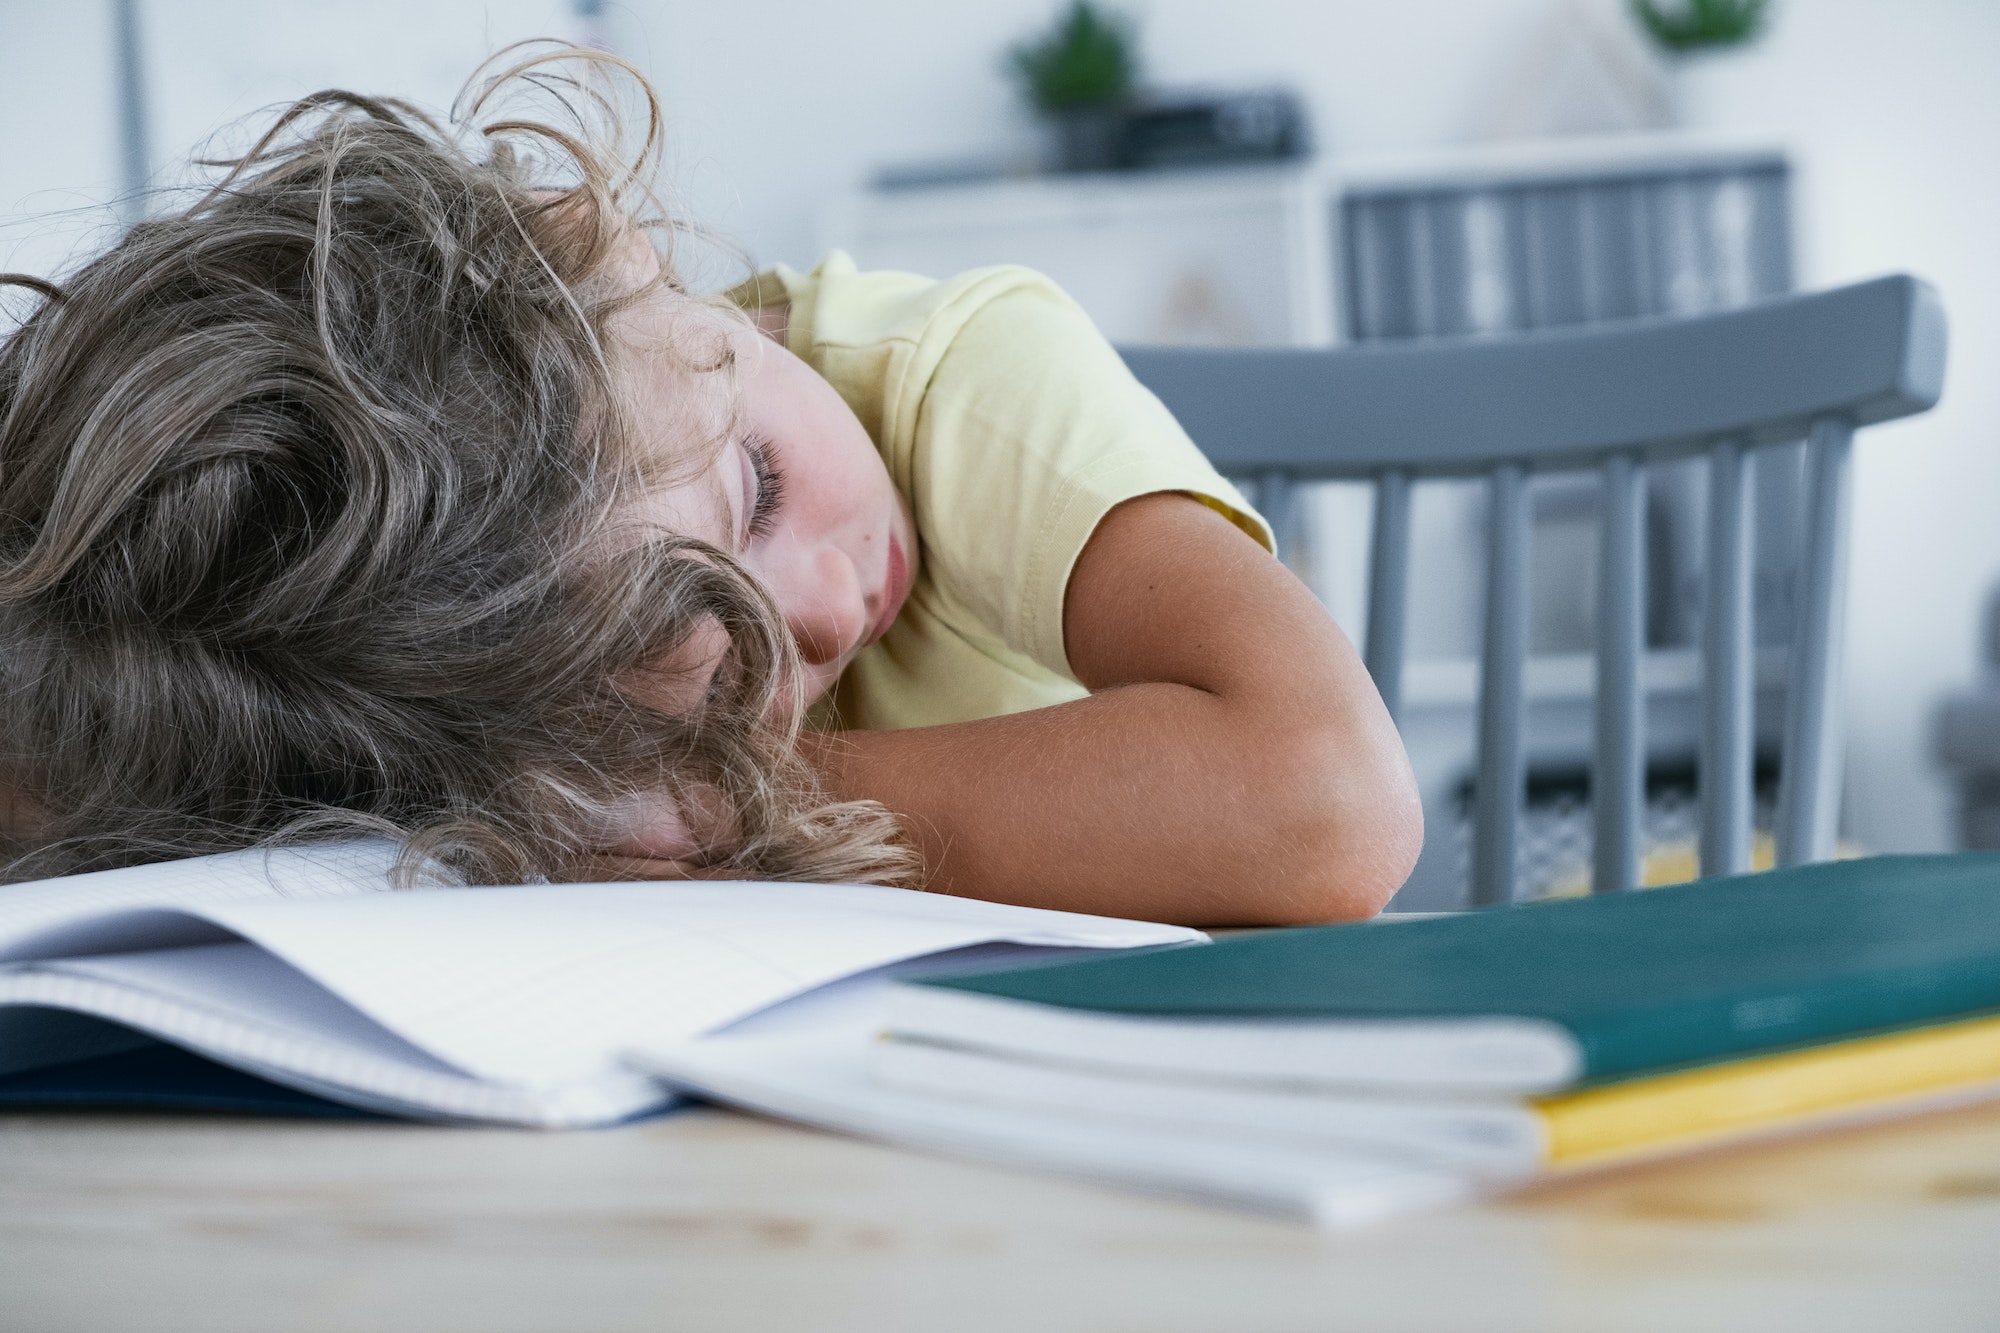 Treating ADHD can prevent exhaustion